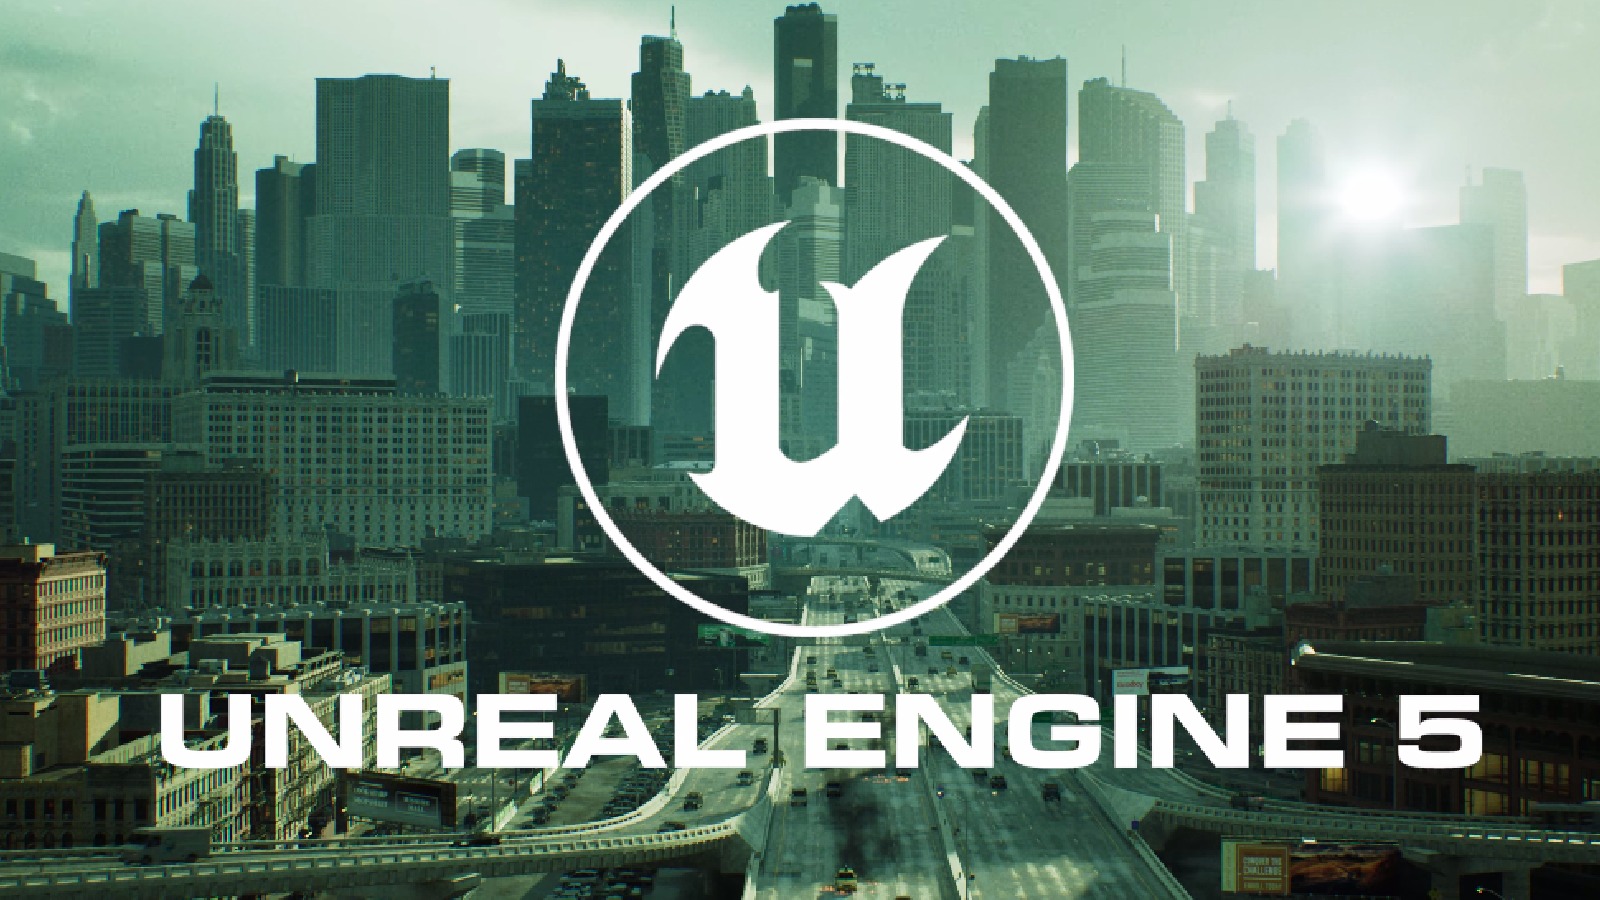 Unreal Engine Wallpapers